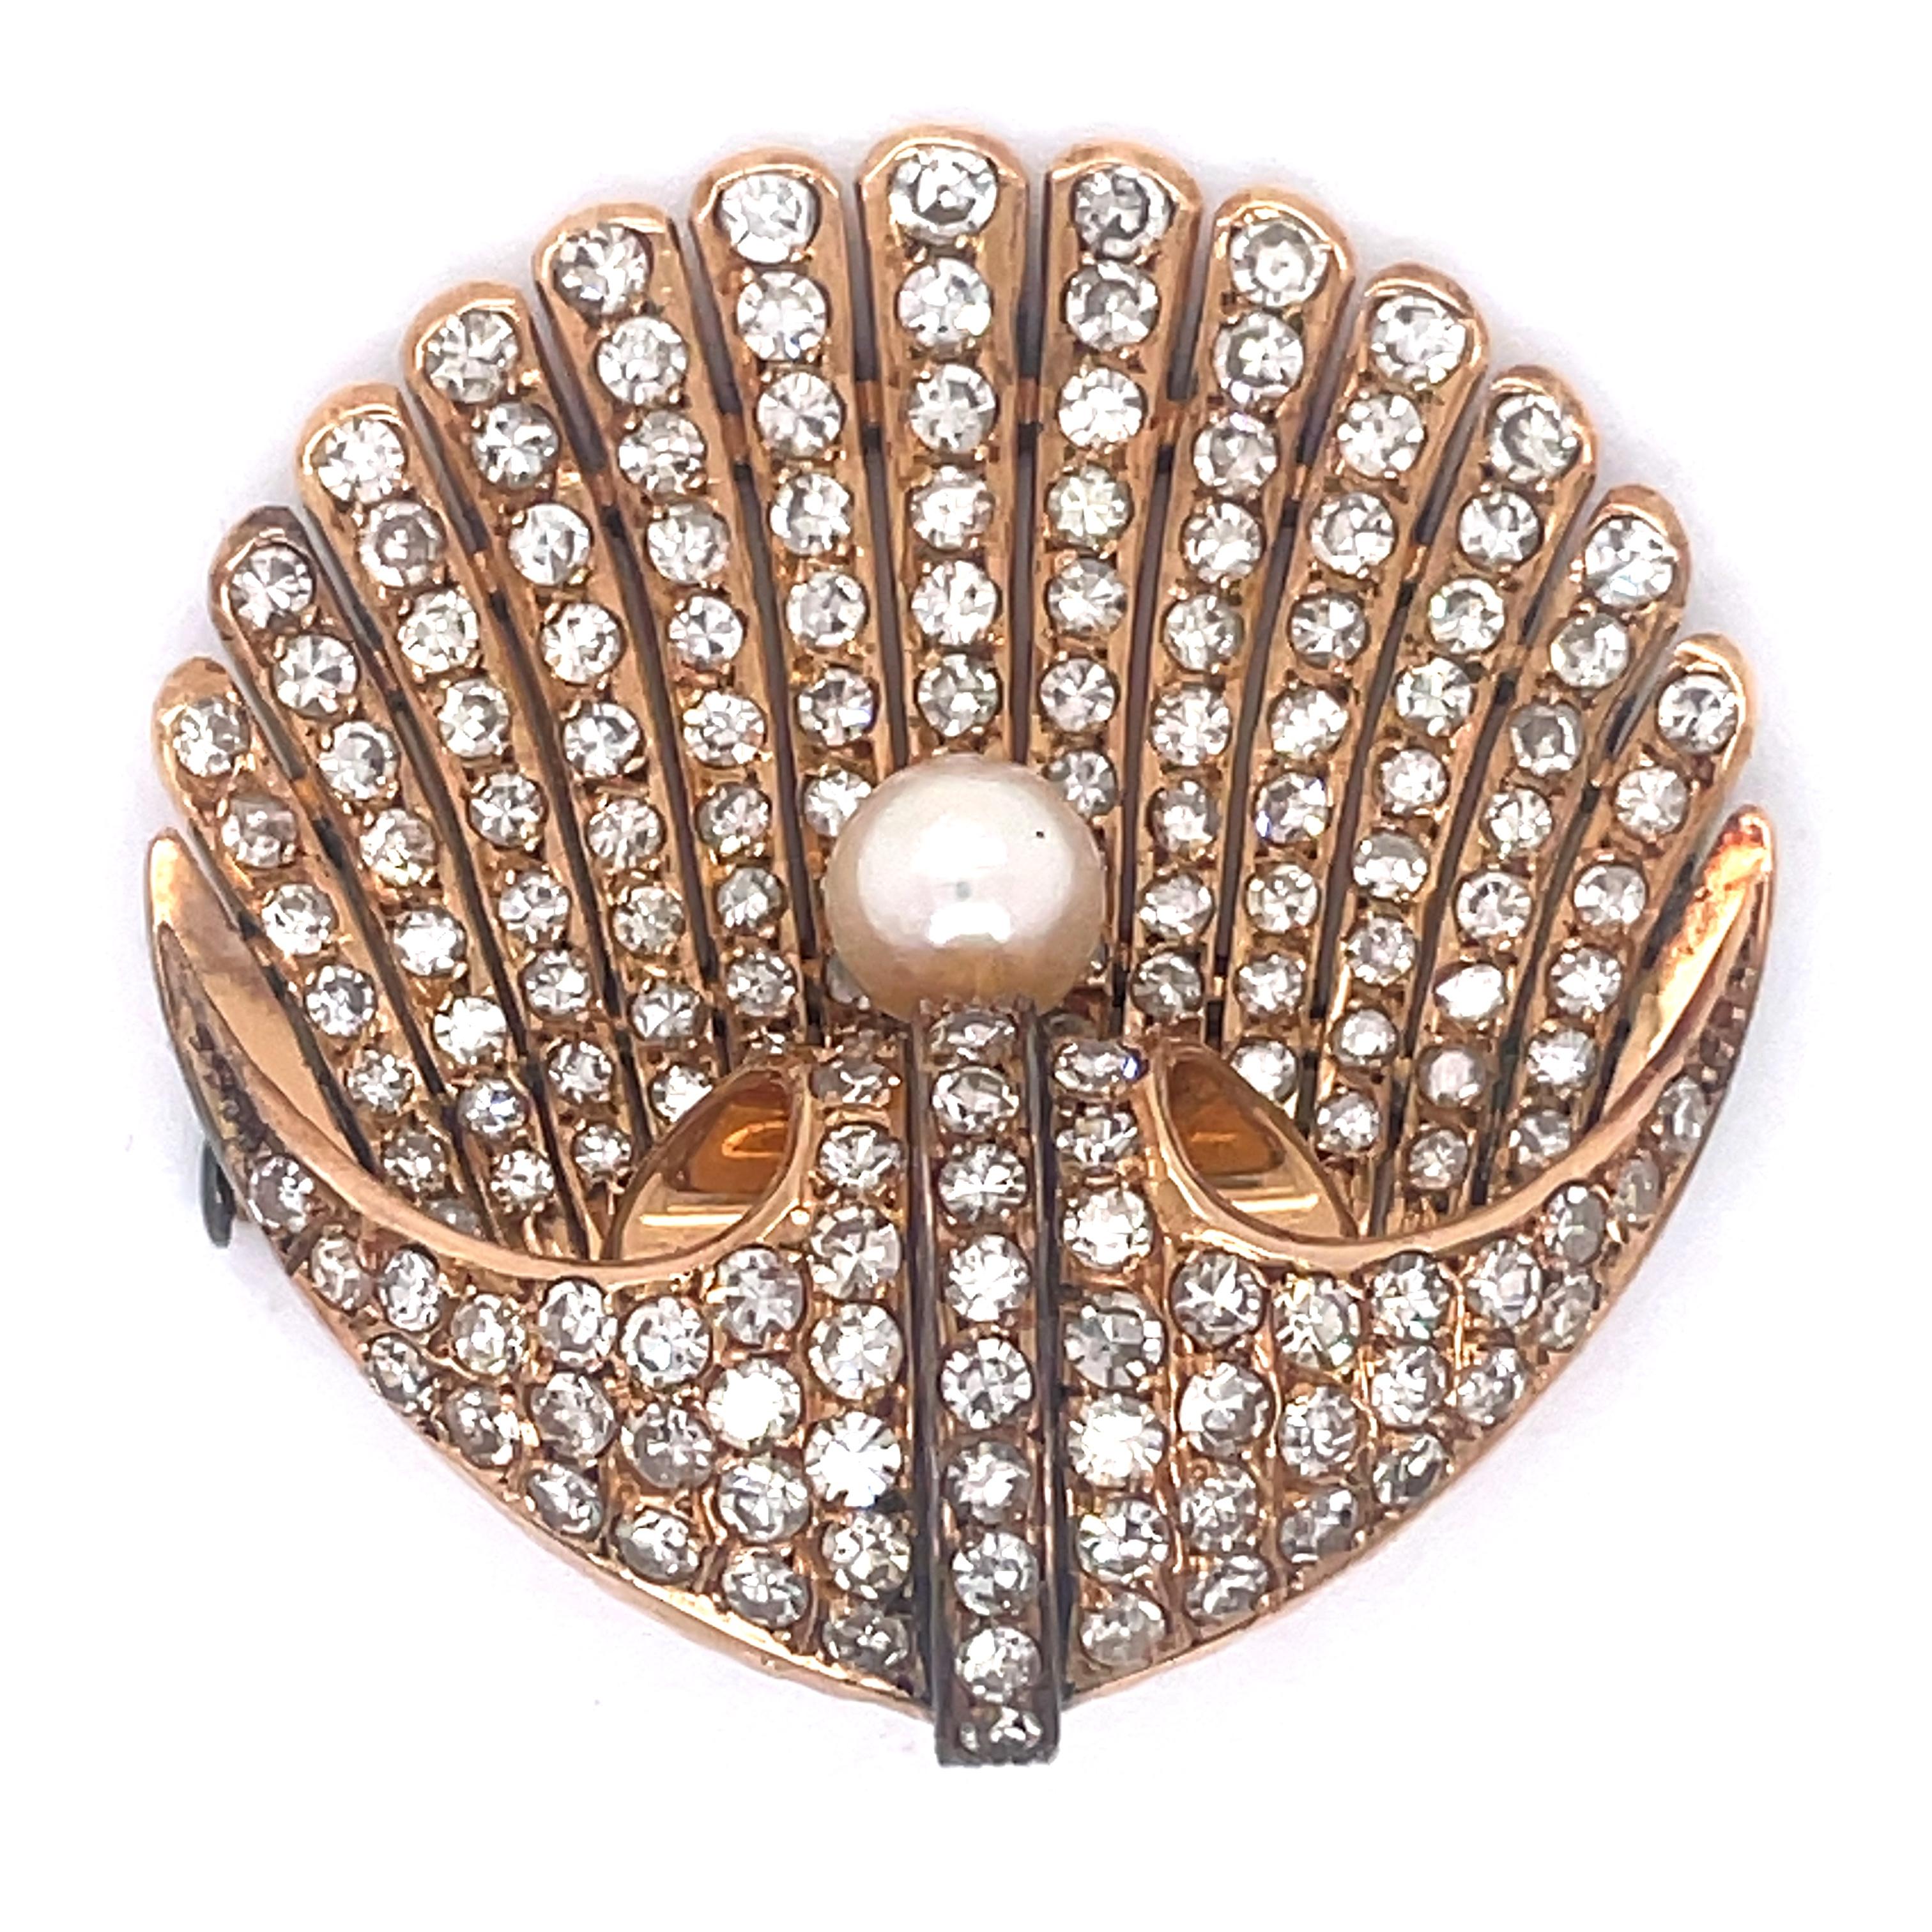 Vintage pearl and diamonds brooch for women, Shell Brooch, Rose Gold 14K Brooch, Estate jewelry, one of a kind vintage brooch 


Jewelry Material: Rose Gold 14K (the gold has been tested by a professional)
Total Carat Weight: 3.5ct (Approx.)
Total